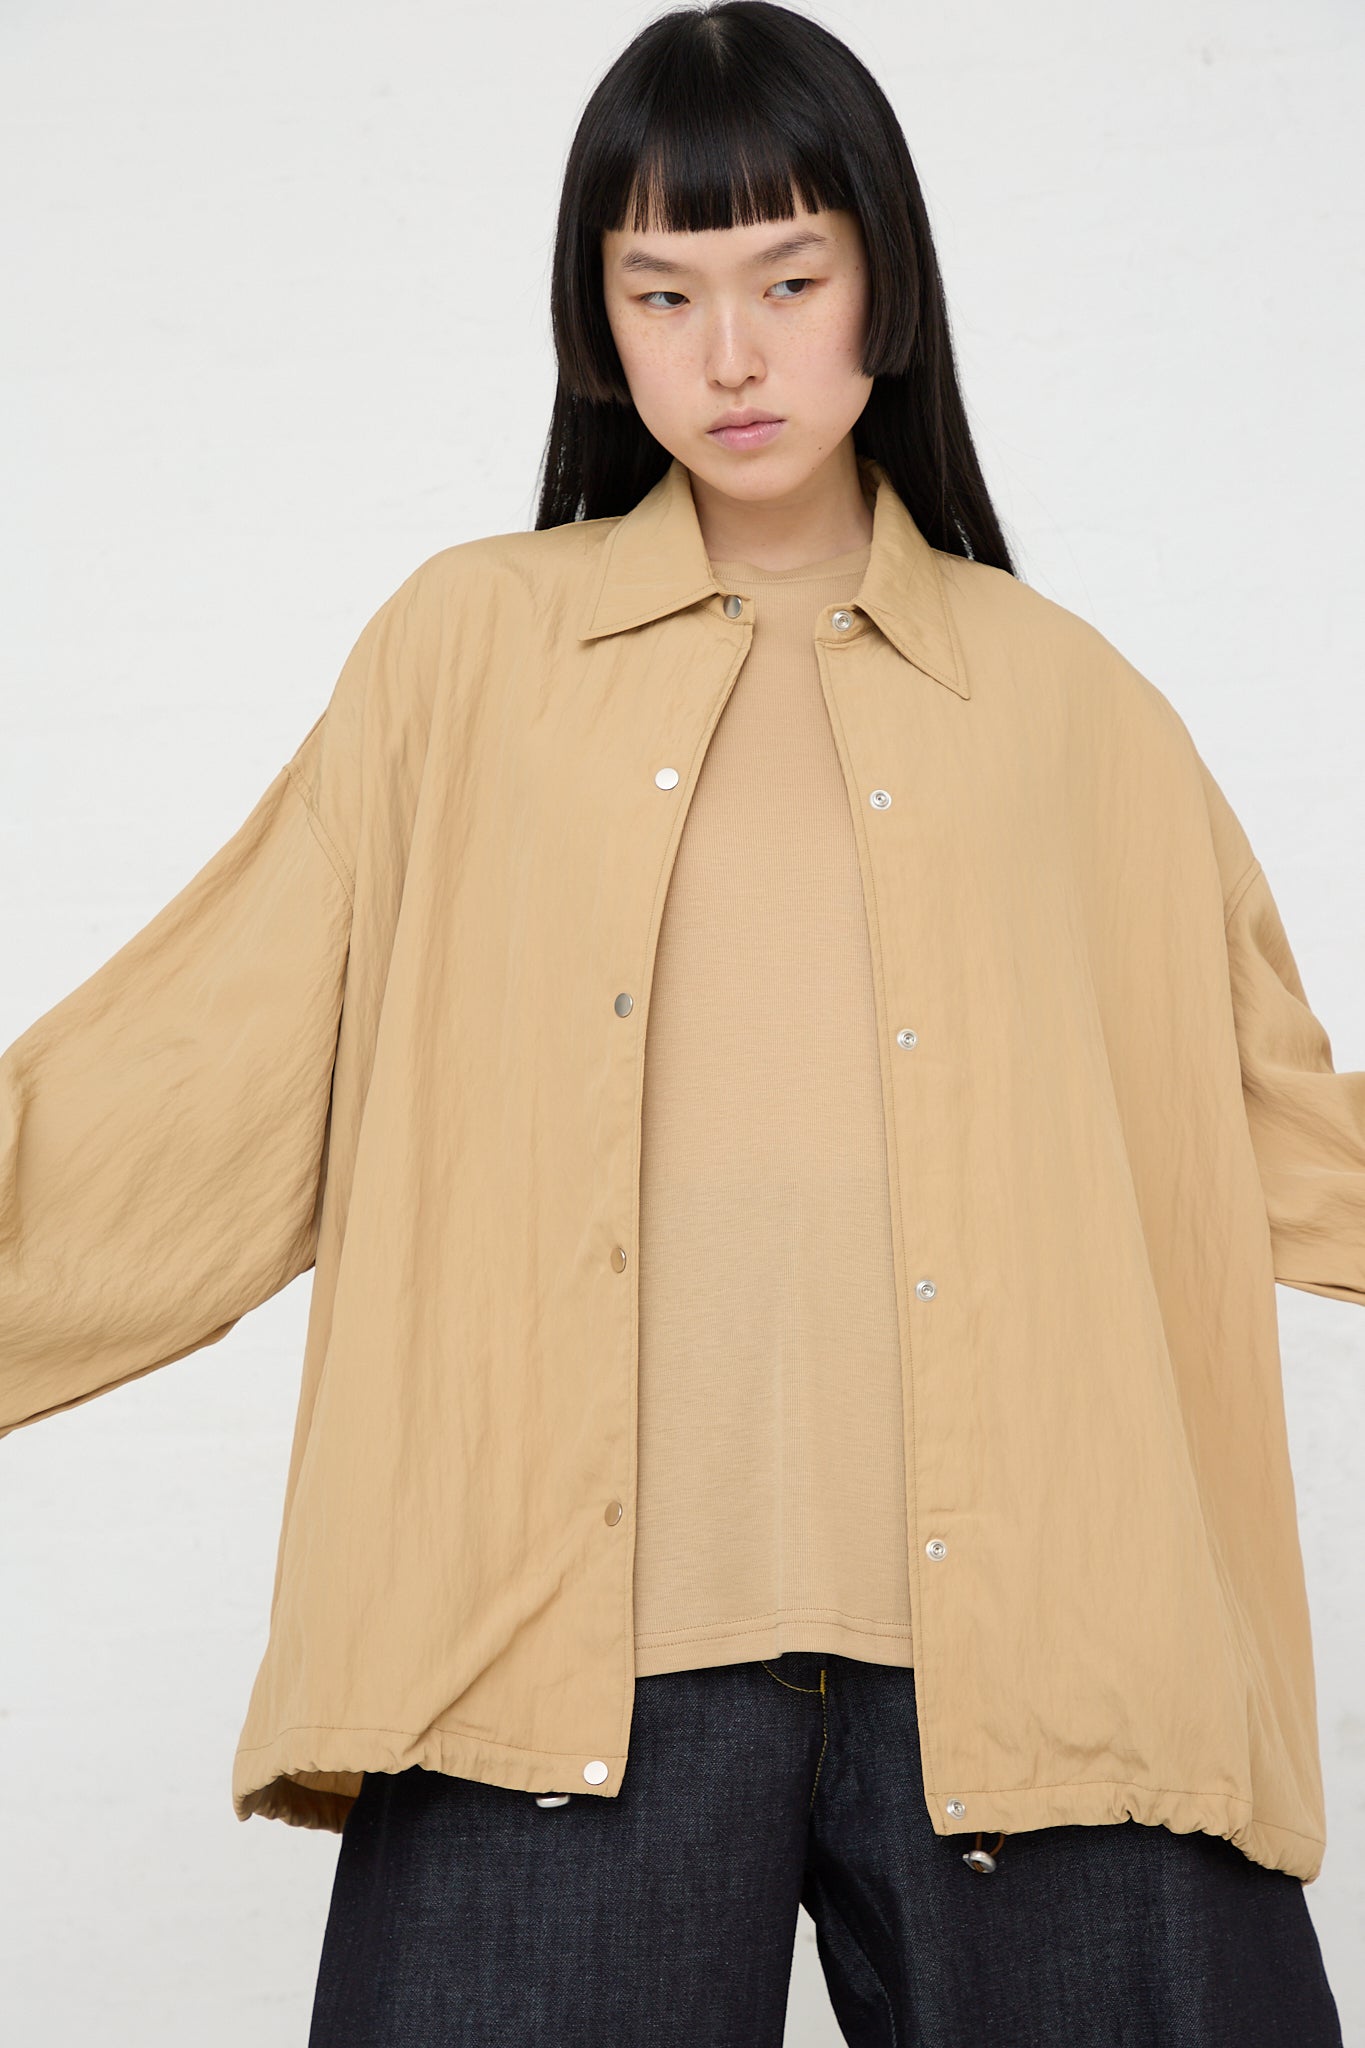 A model wearing a viscose blend tan Sprung Coach Jacket in Sand by Studio Nicholson, with elasticated cuffs, paired with jeans.